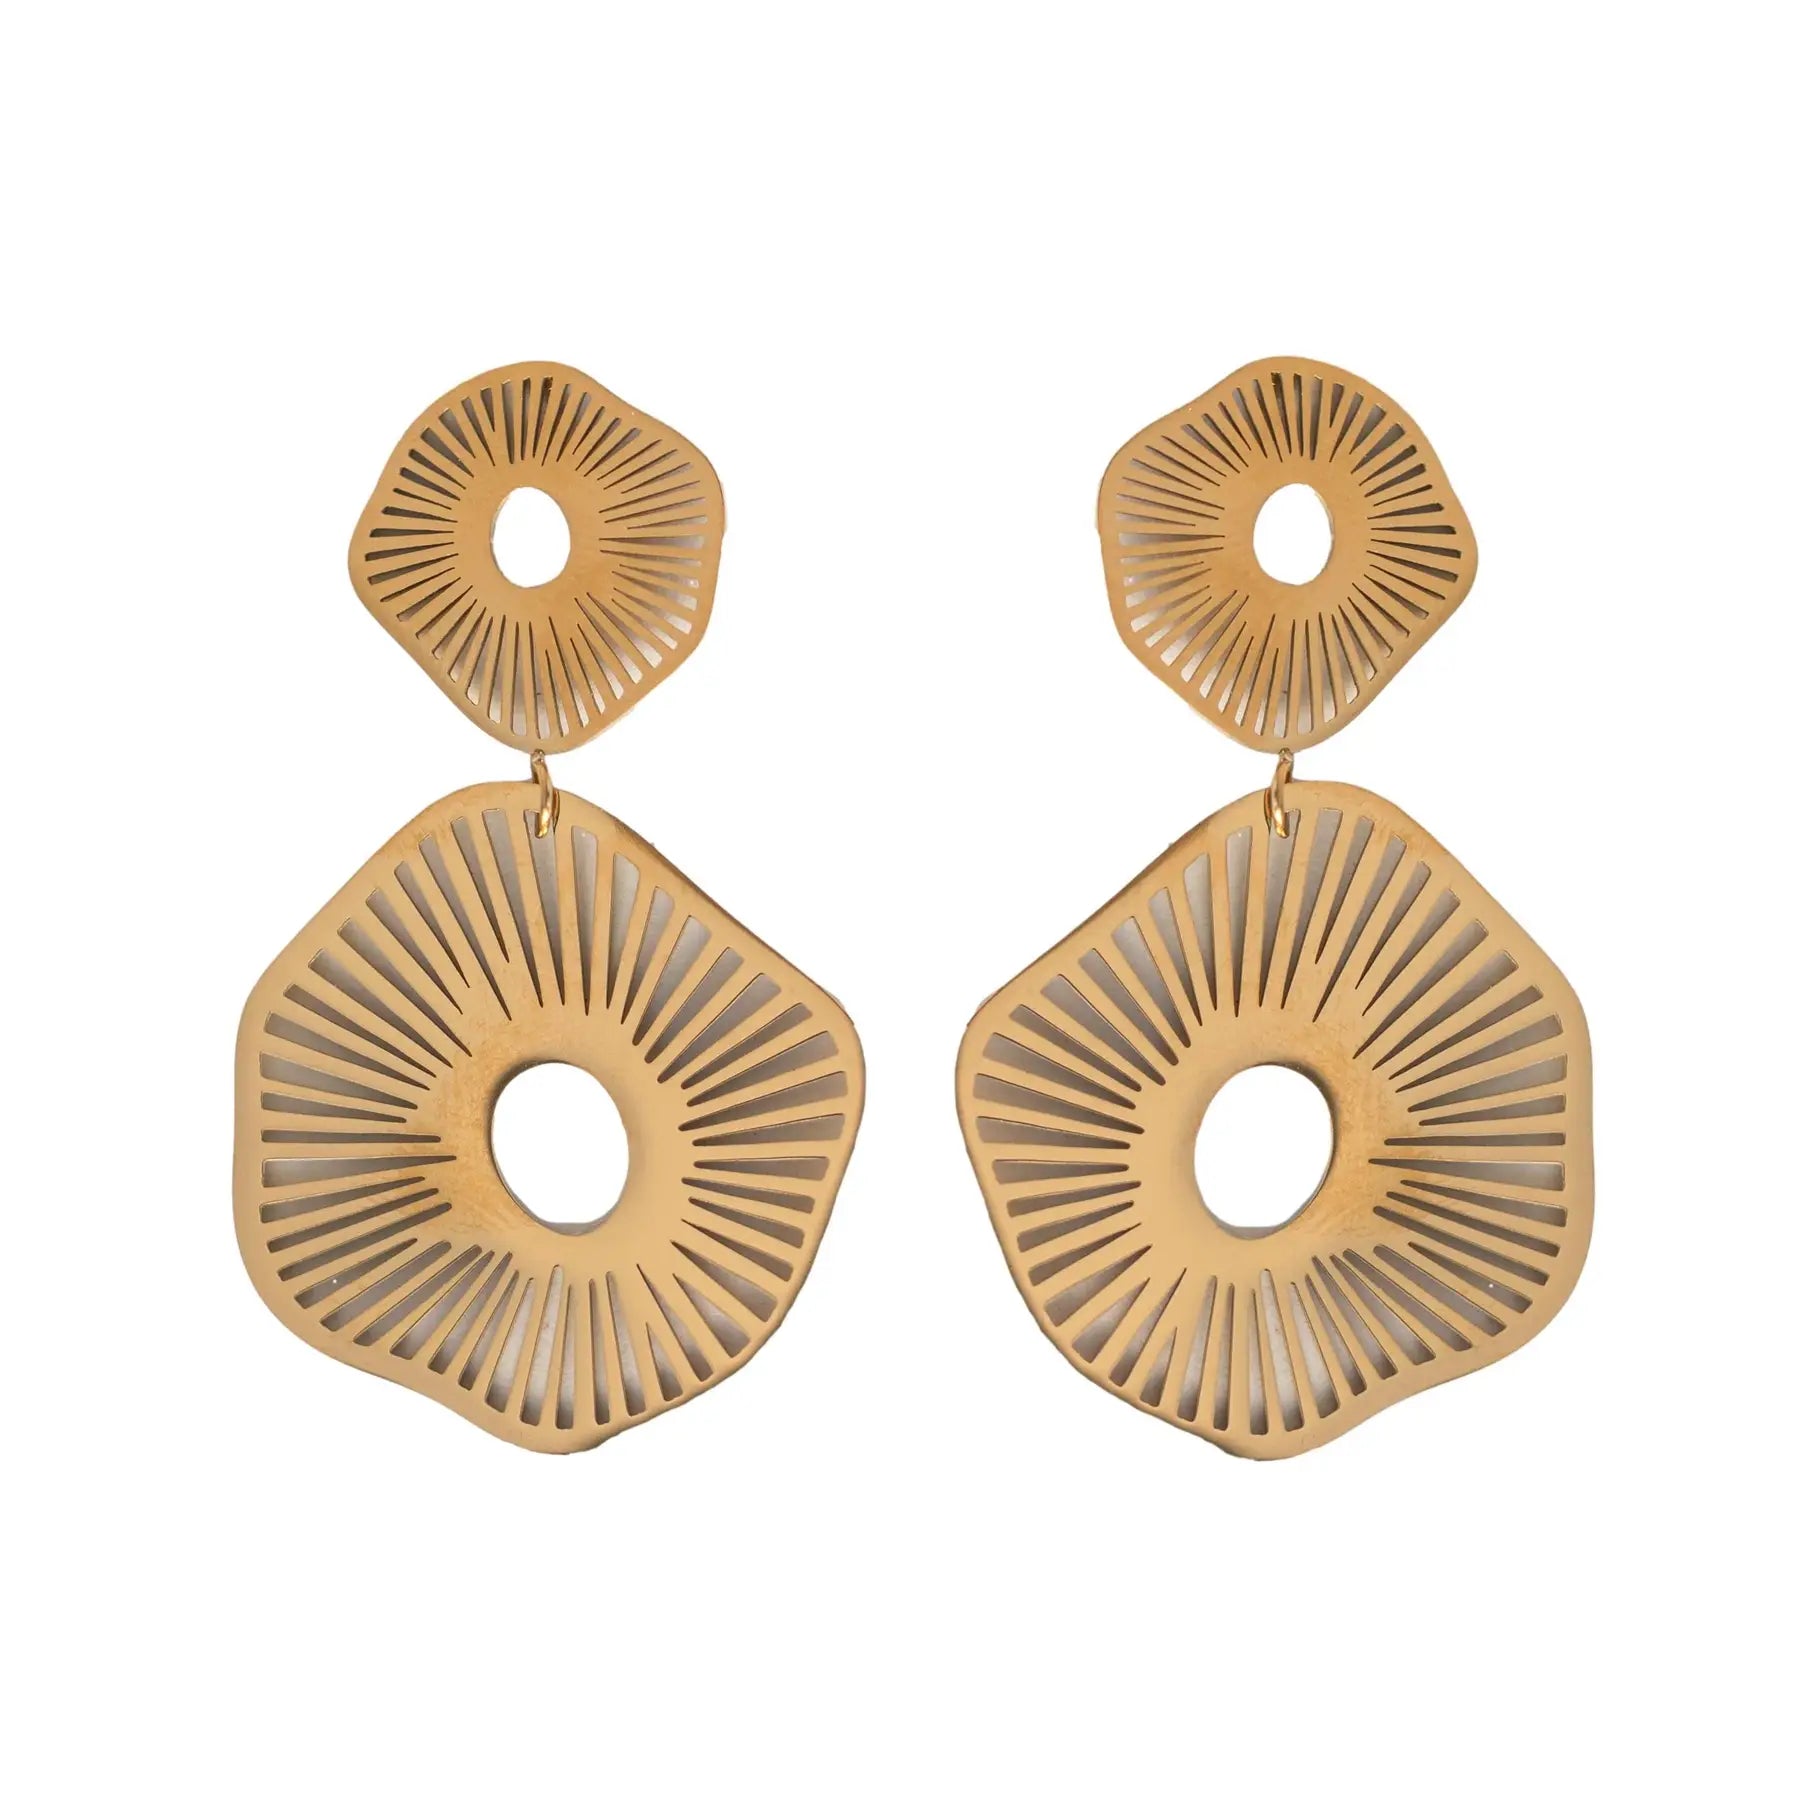 Gold Anemone Statement Earrings-110 Jewelry & Hair-St Armands Designs of Sarasota-July & June Women's Fashion Boutique Located in San Antonio, Texas